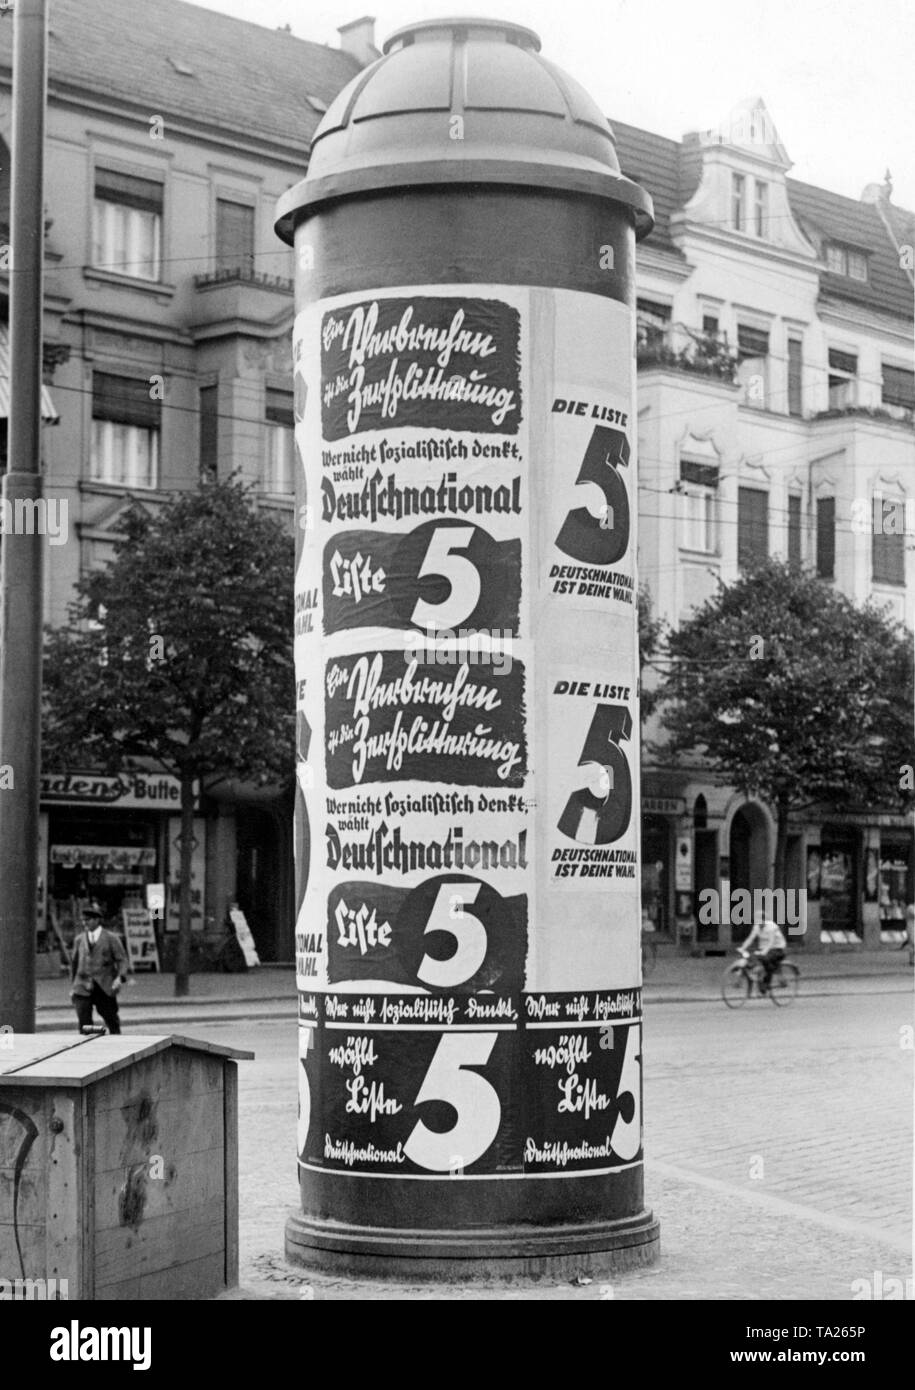 Advertising column at the corner of Ordensmeisterstrasse in Berlin-Tempelhof. This is the canvassing of the German National People's Party for the Reichstag election in 1932. The slogan 'Crime is the split-up' invokes national unity. Stock Photo